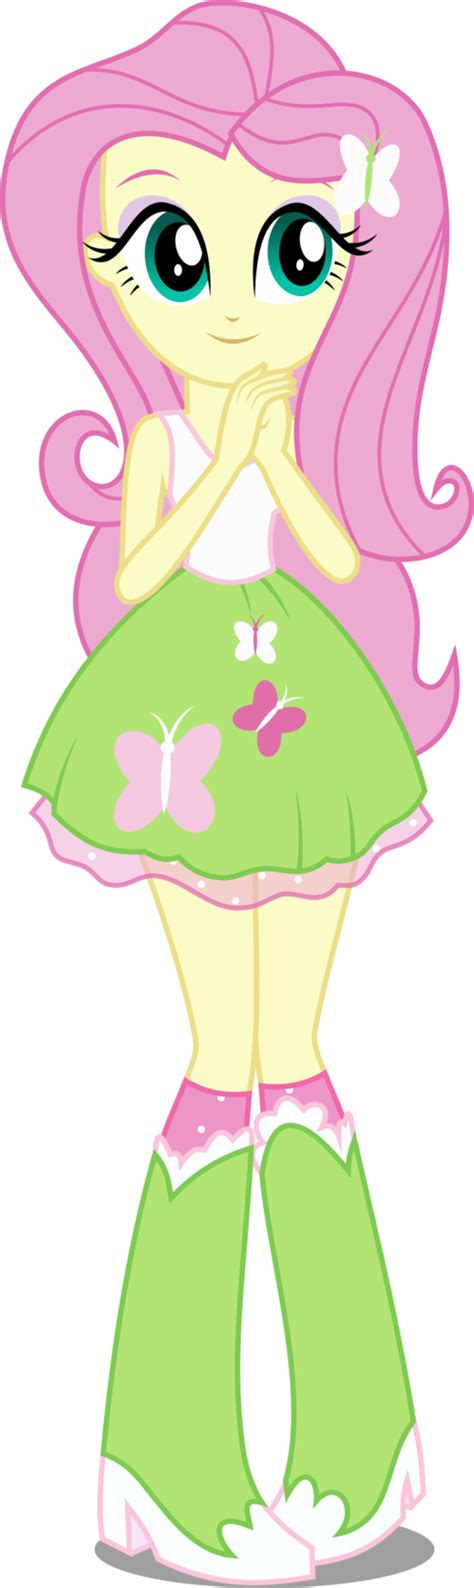 Equestria Girl Fluttershy My Little Pony Characters My Little Pony